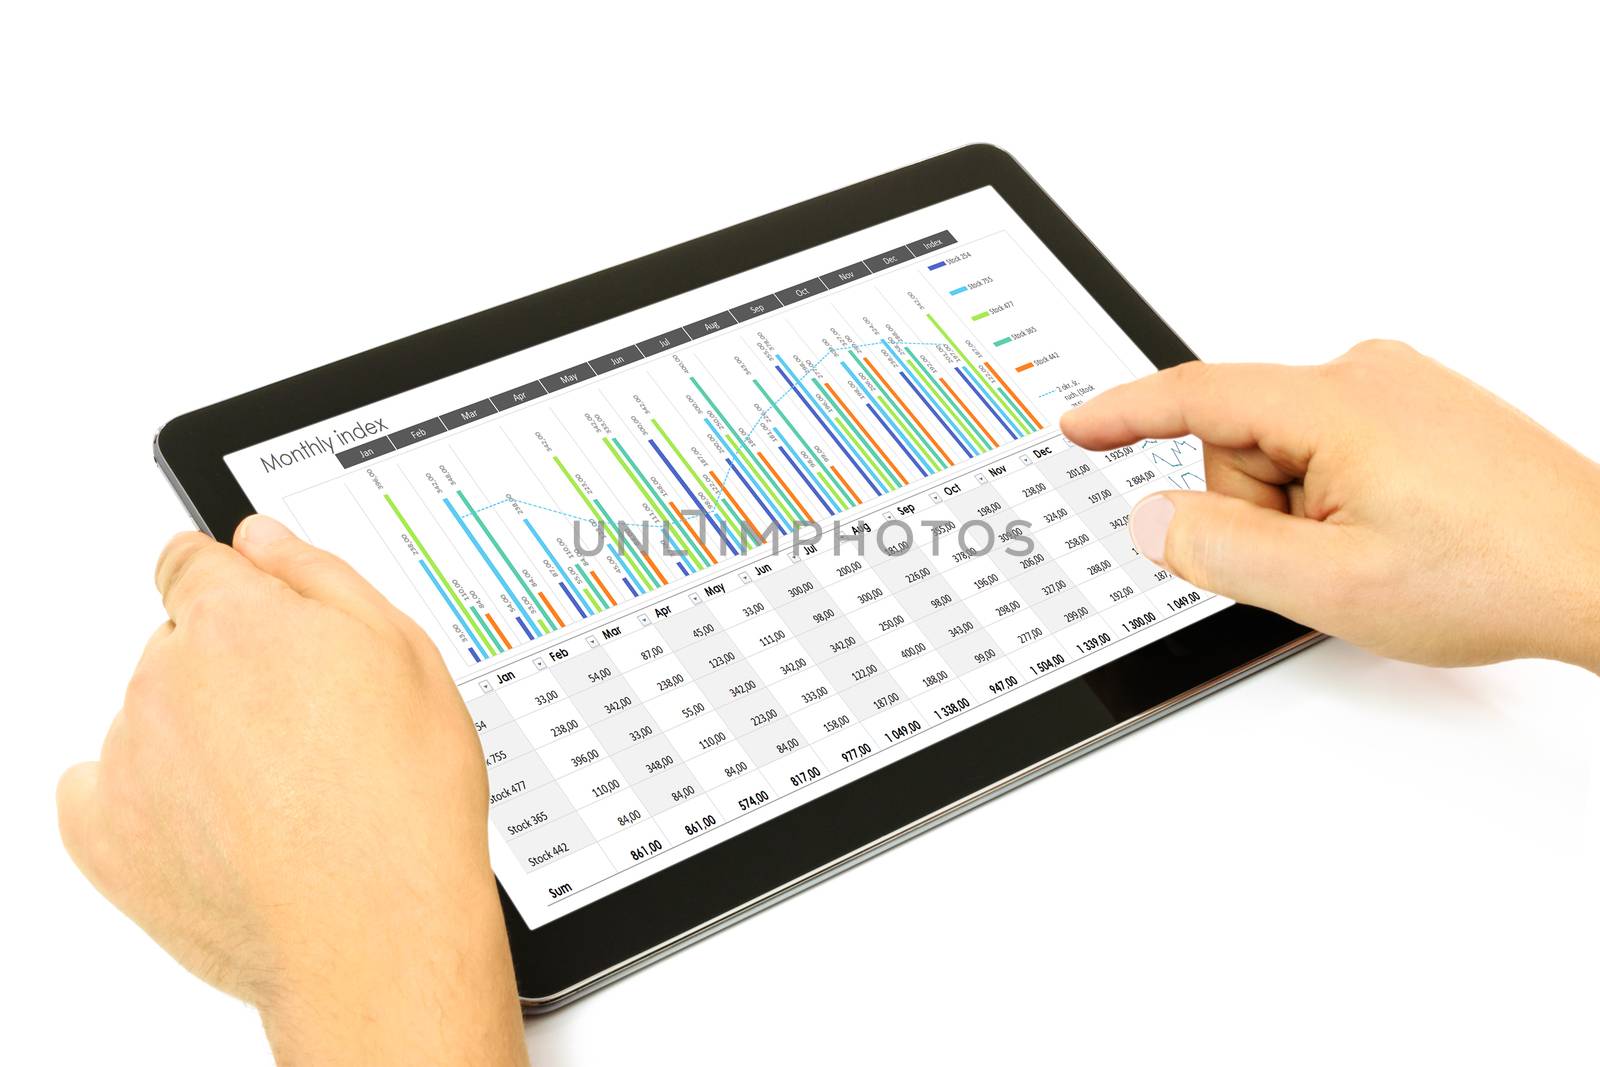 Analyzing financial data on the tablet by wdnet_studio